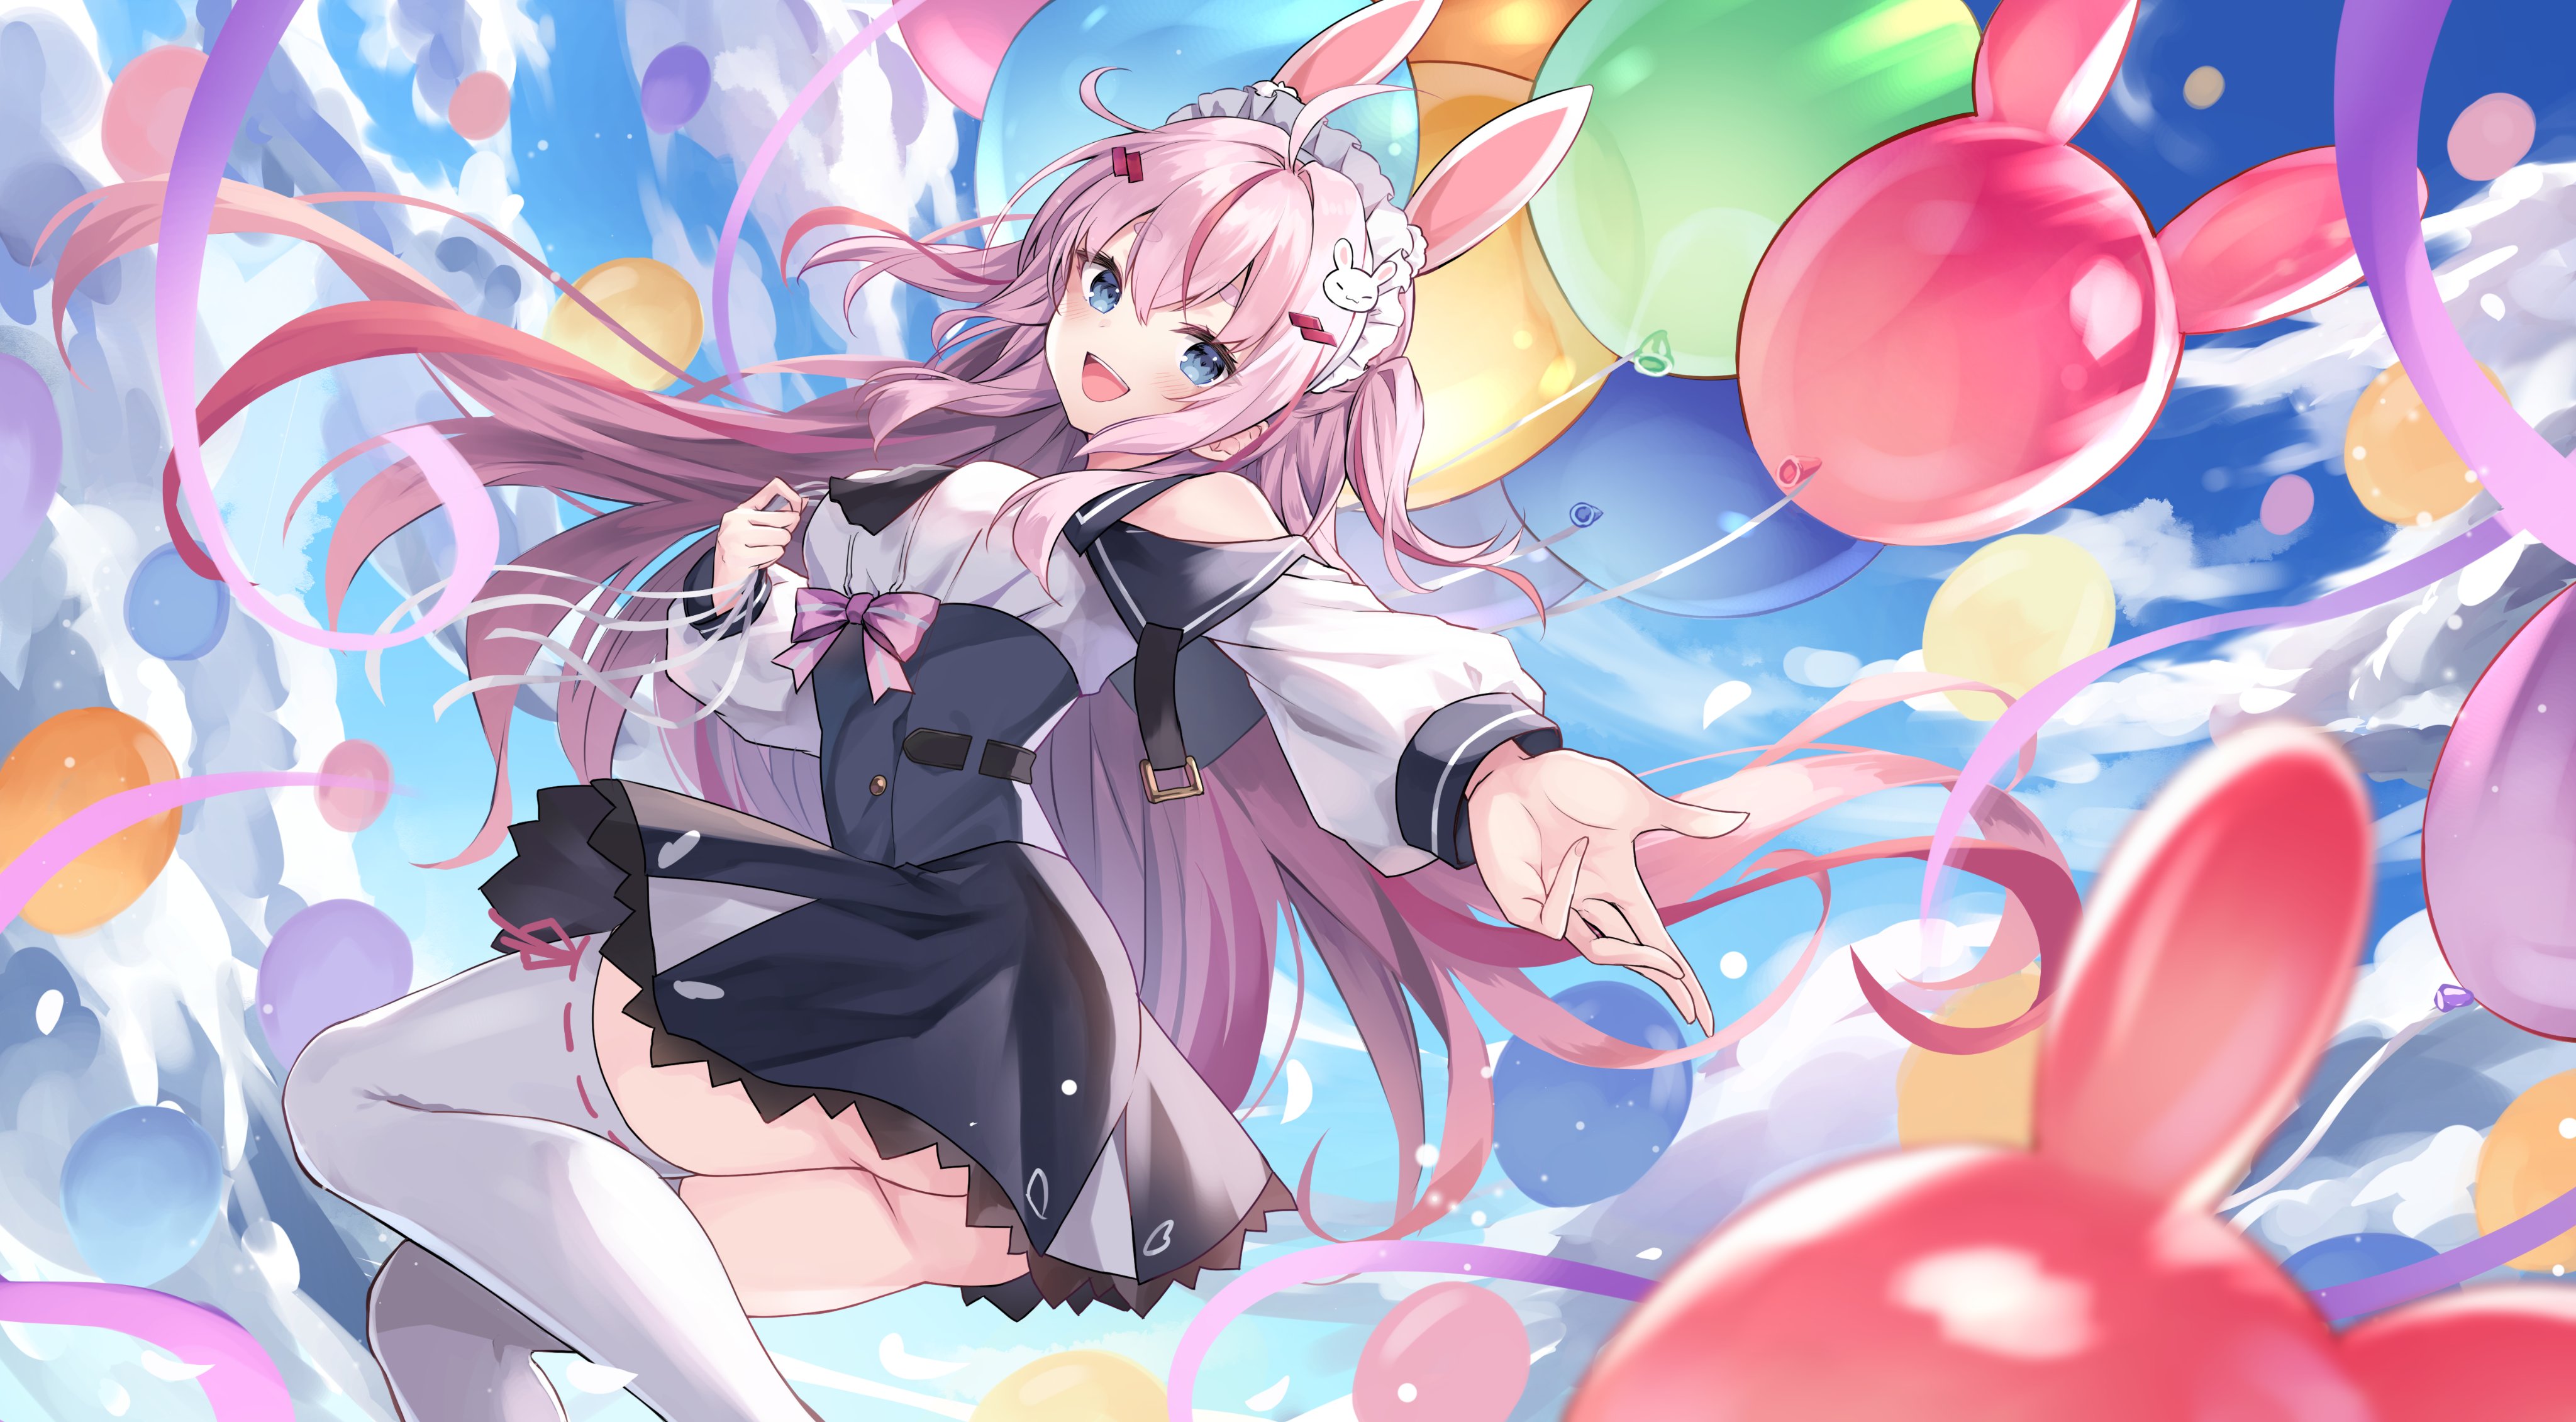 Anime 4096x2261 anime anime girls pink hair blue eyes bunny girl bunny ears balloon looking at viewer open mouth ass stockings white stockings long hair nopan dress maid outfit artwork Crerp